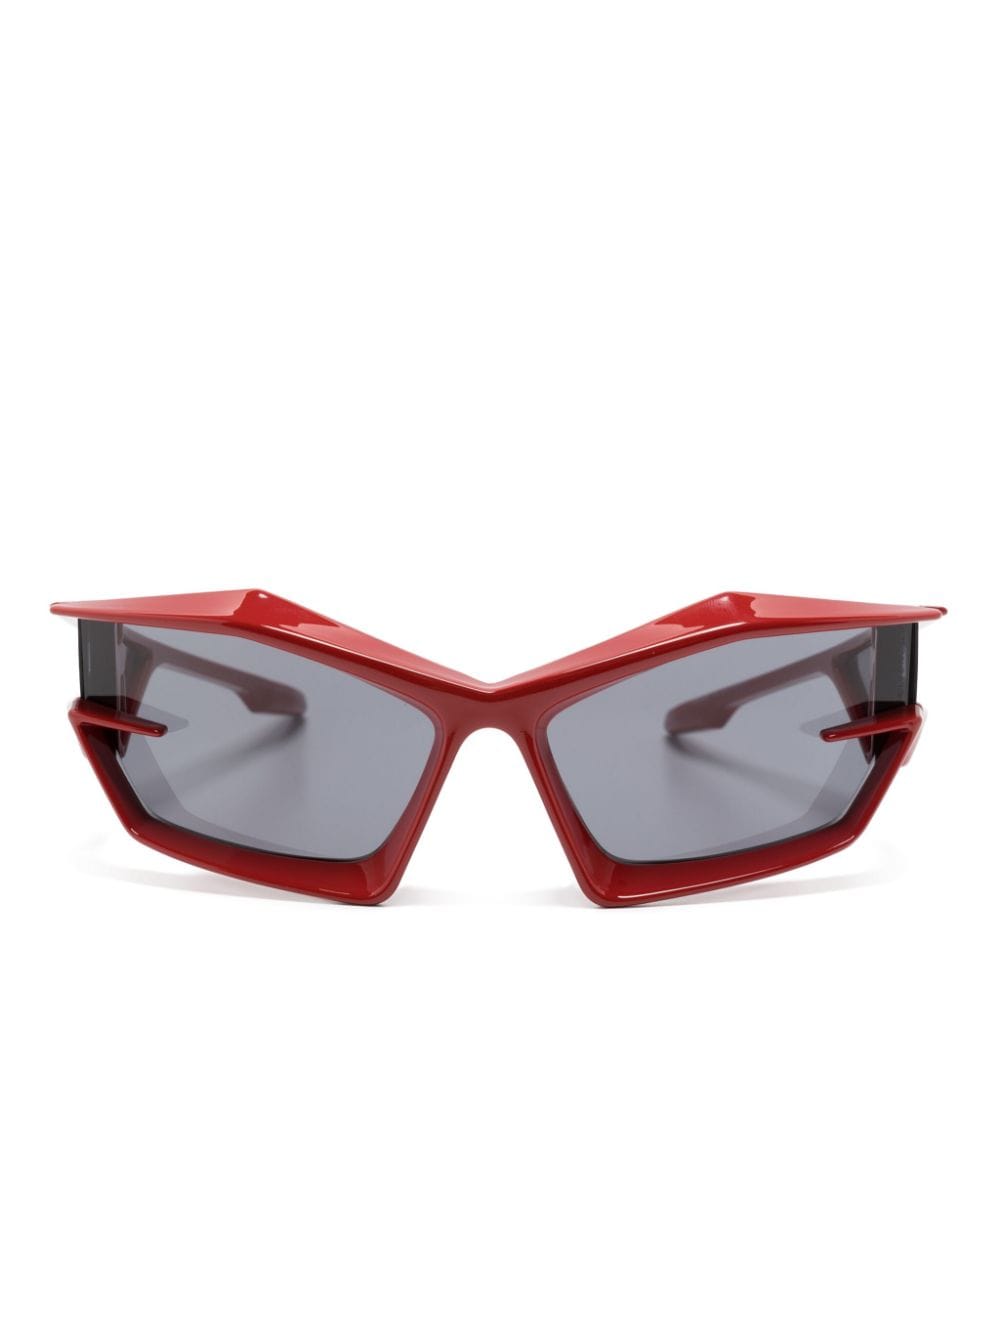 Givenchy Eyewear Giv Cut zonnebril met shield montuur Rood